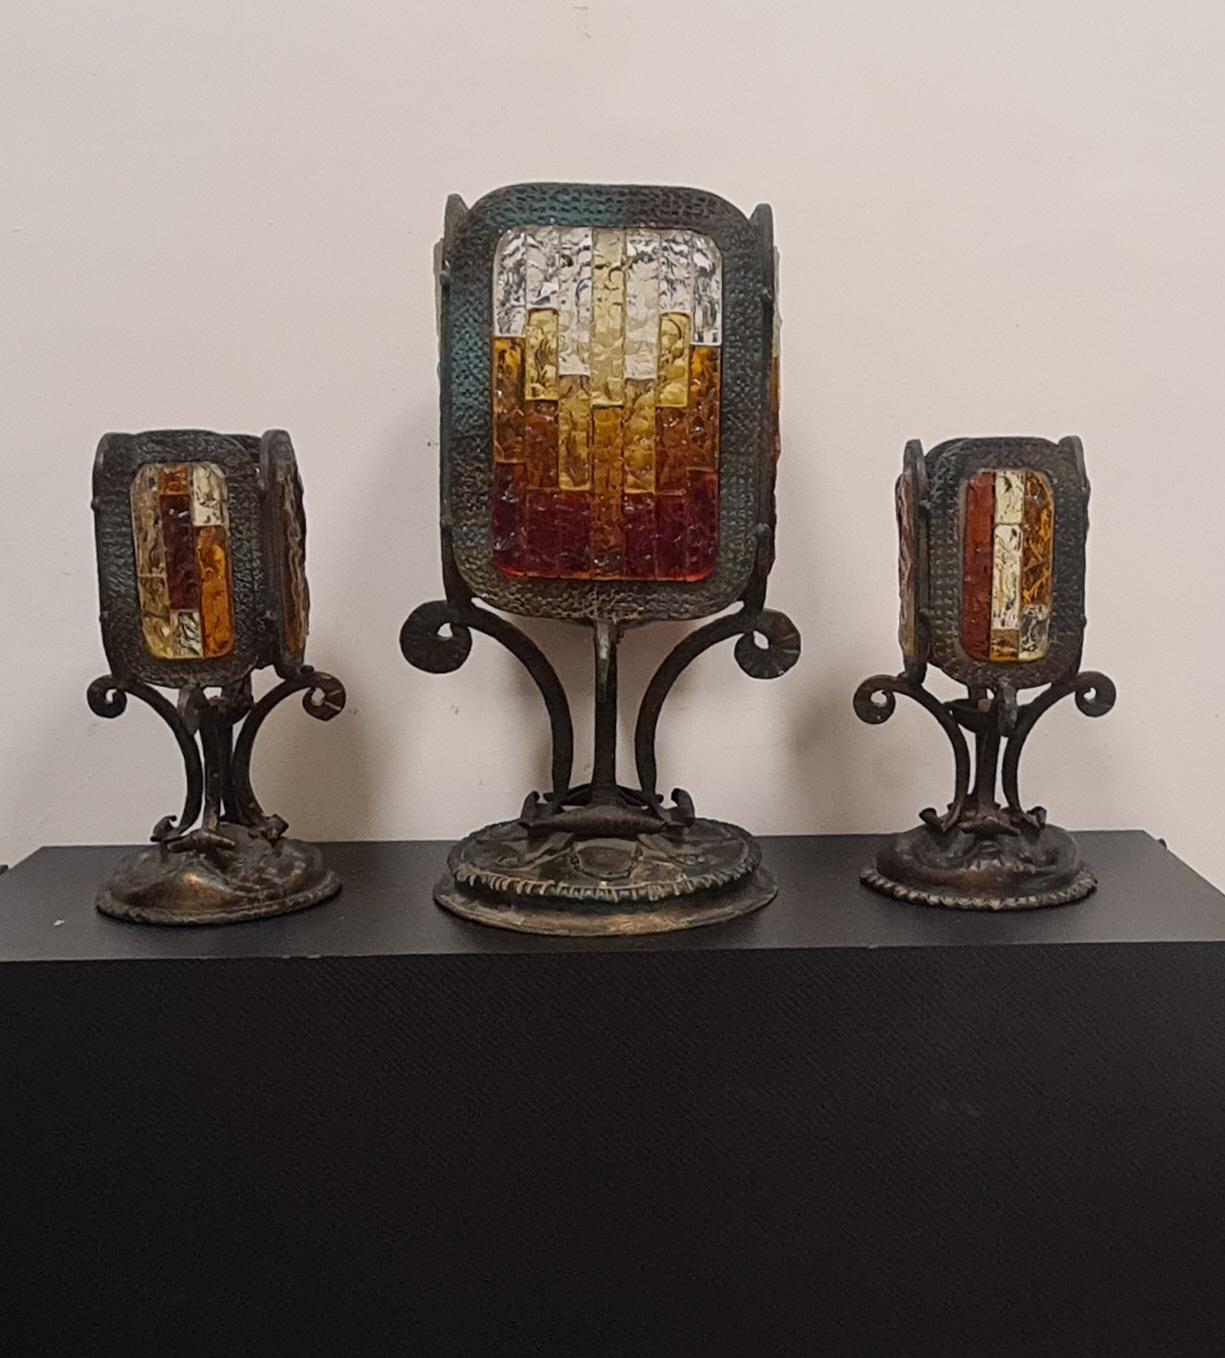 Set consisting of 3 table lamps in Brutalist style attributable to Poliarte.

3 particular lamps including a large central one and two smaller side abat-jours.

Made in the 1970s from hand-wrought iron and murano glass mosaics in shades of